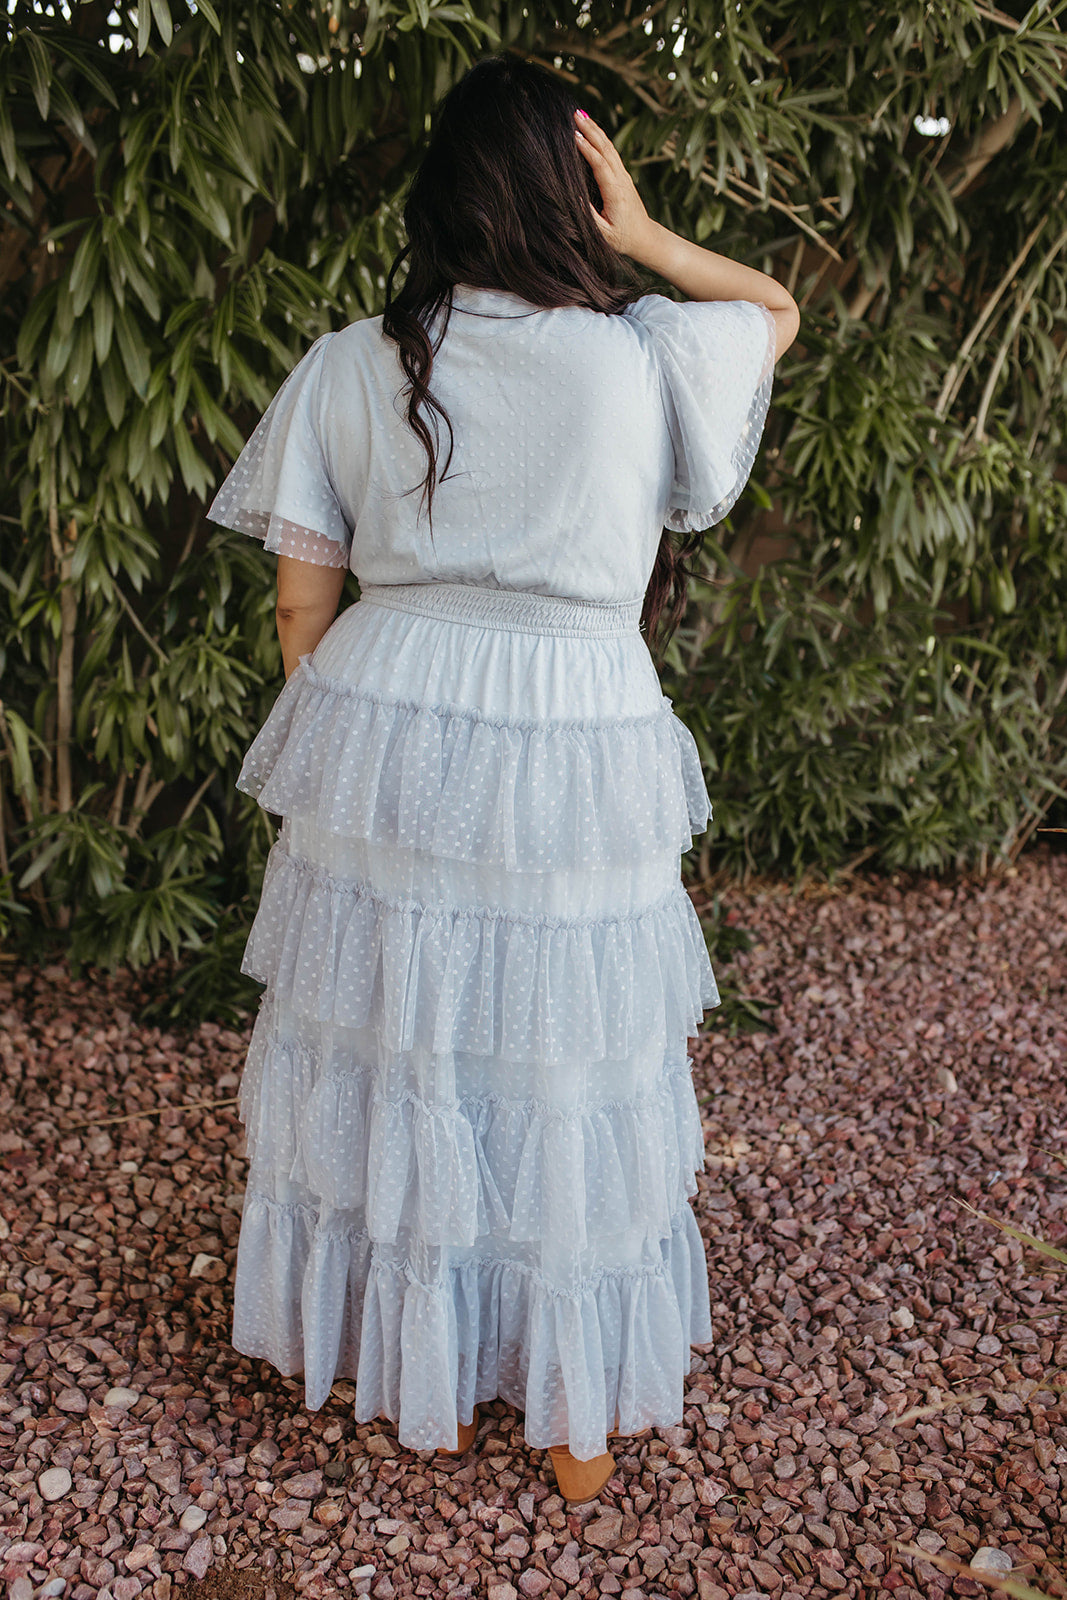 THE BRIELLE TIERED DRESS IN POWDER BLUE